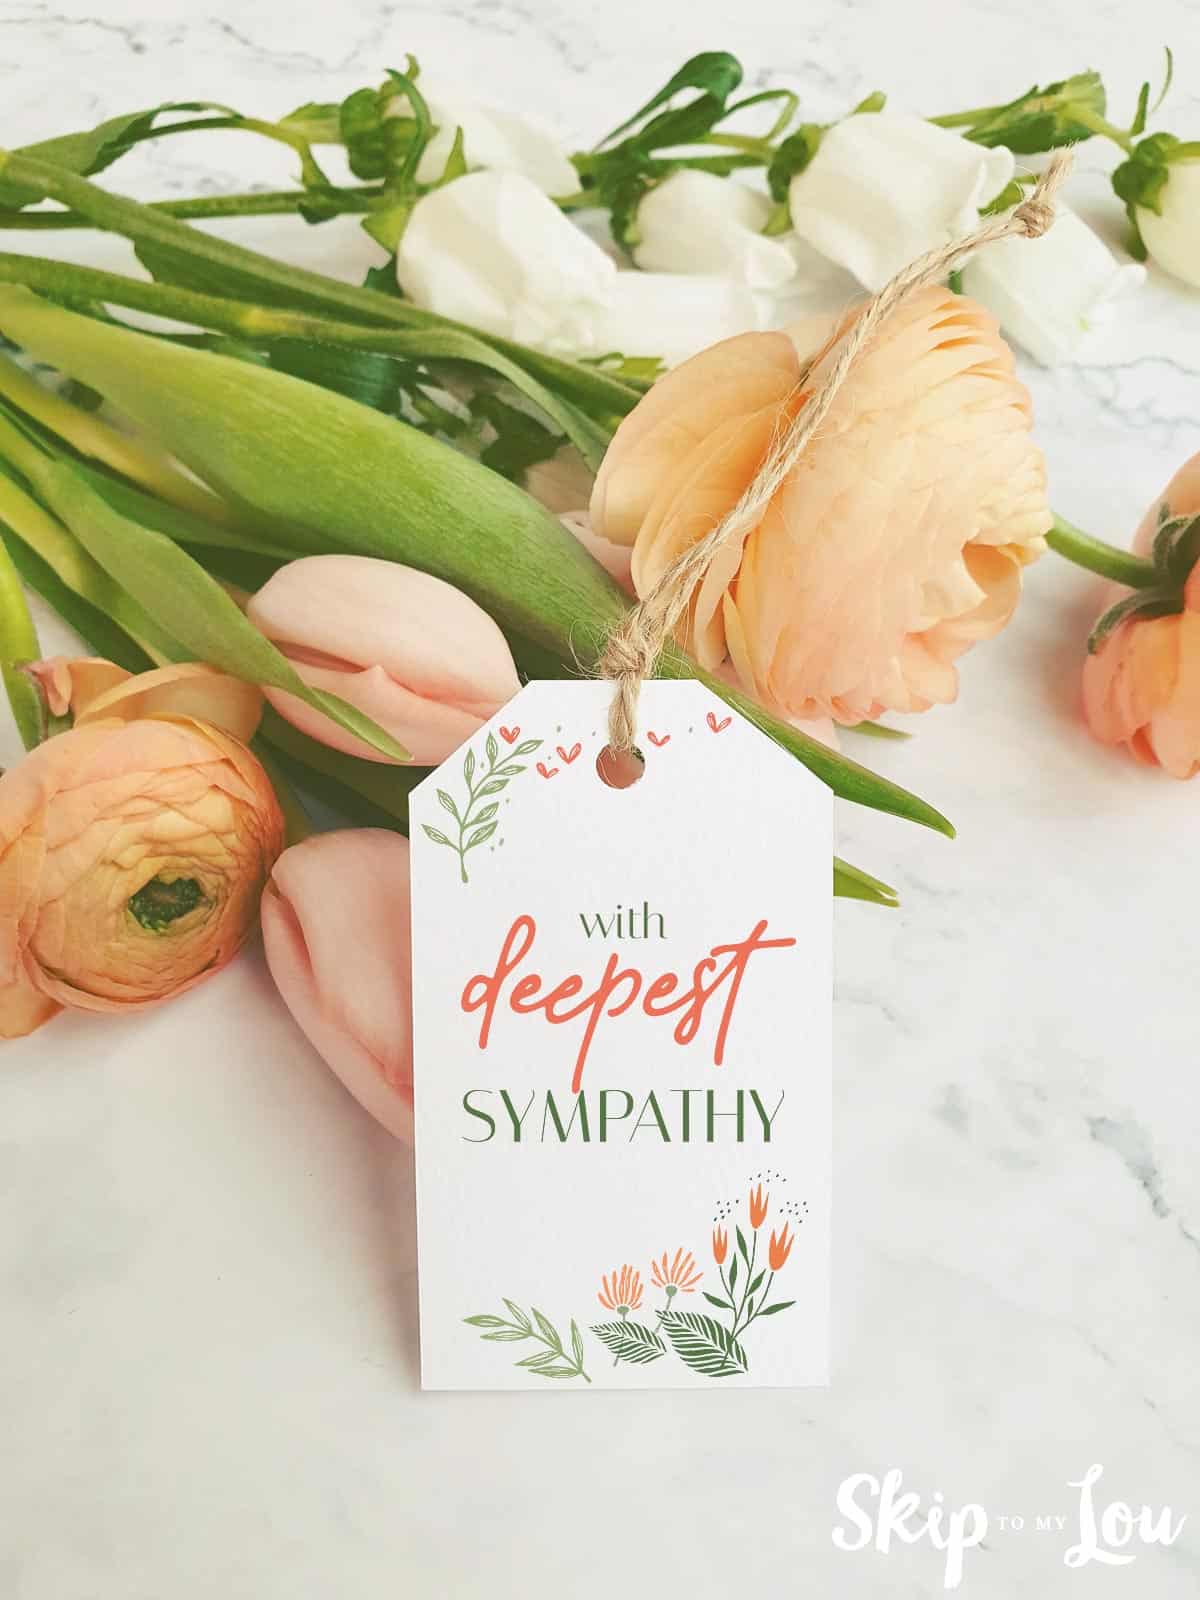 Image shows a flower bouquet with a sympathy tag tied to it. Skip to my Lou.